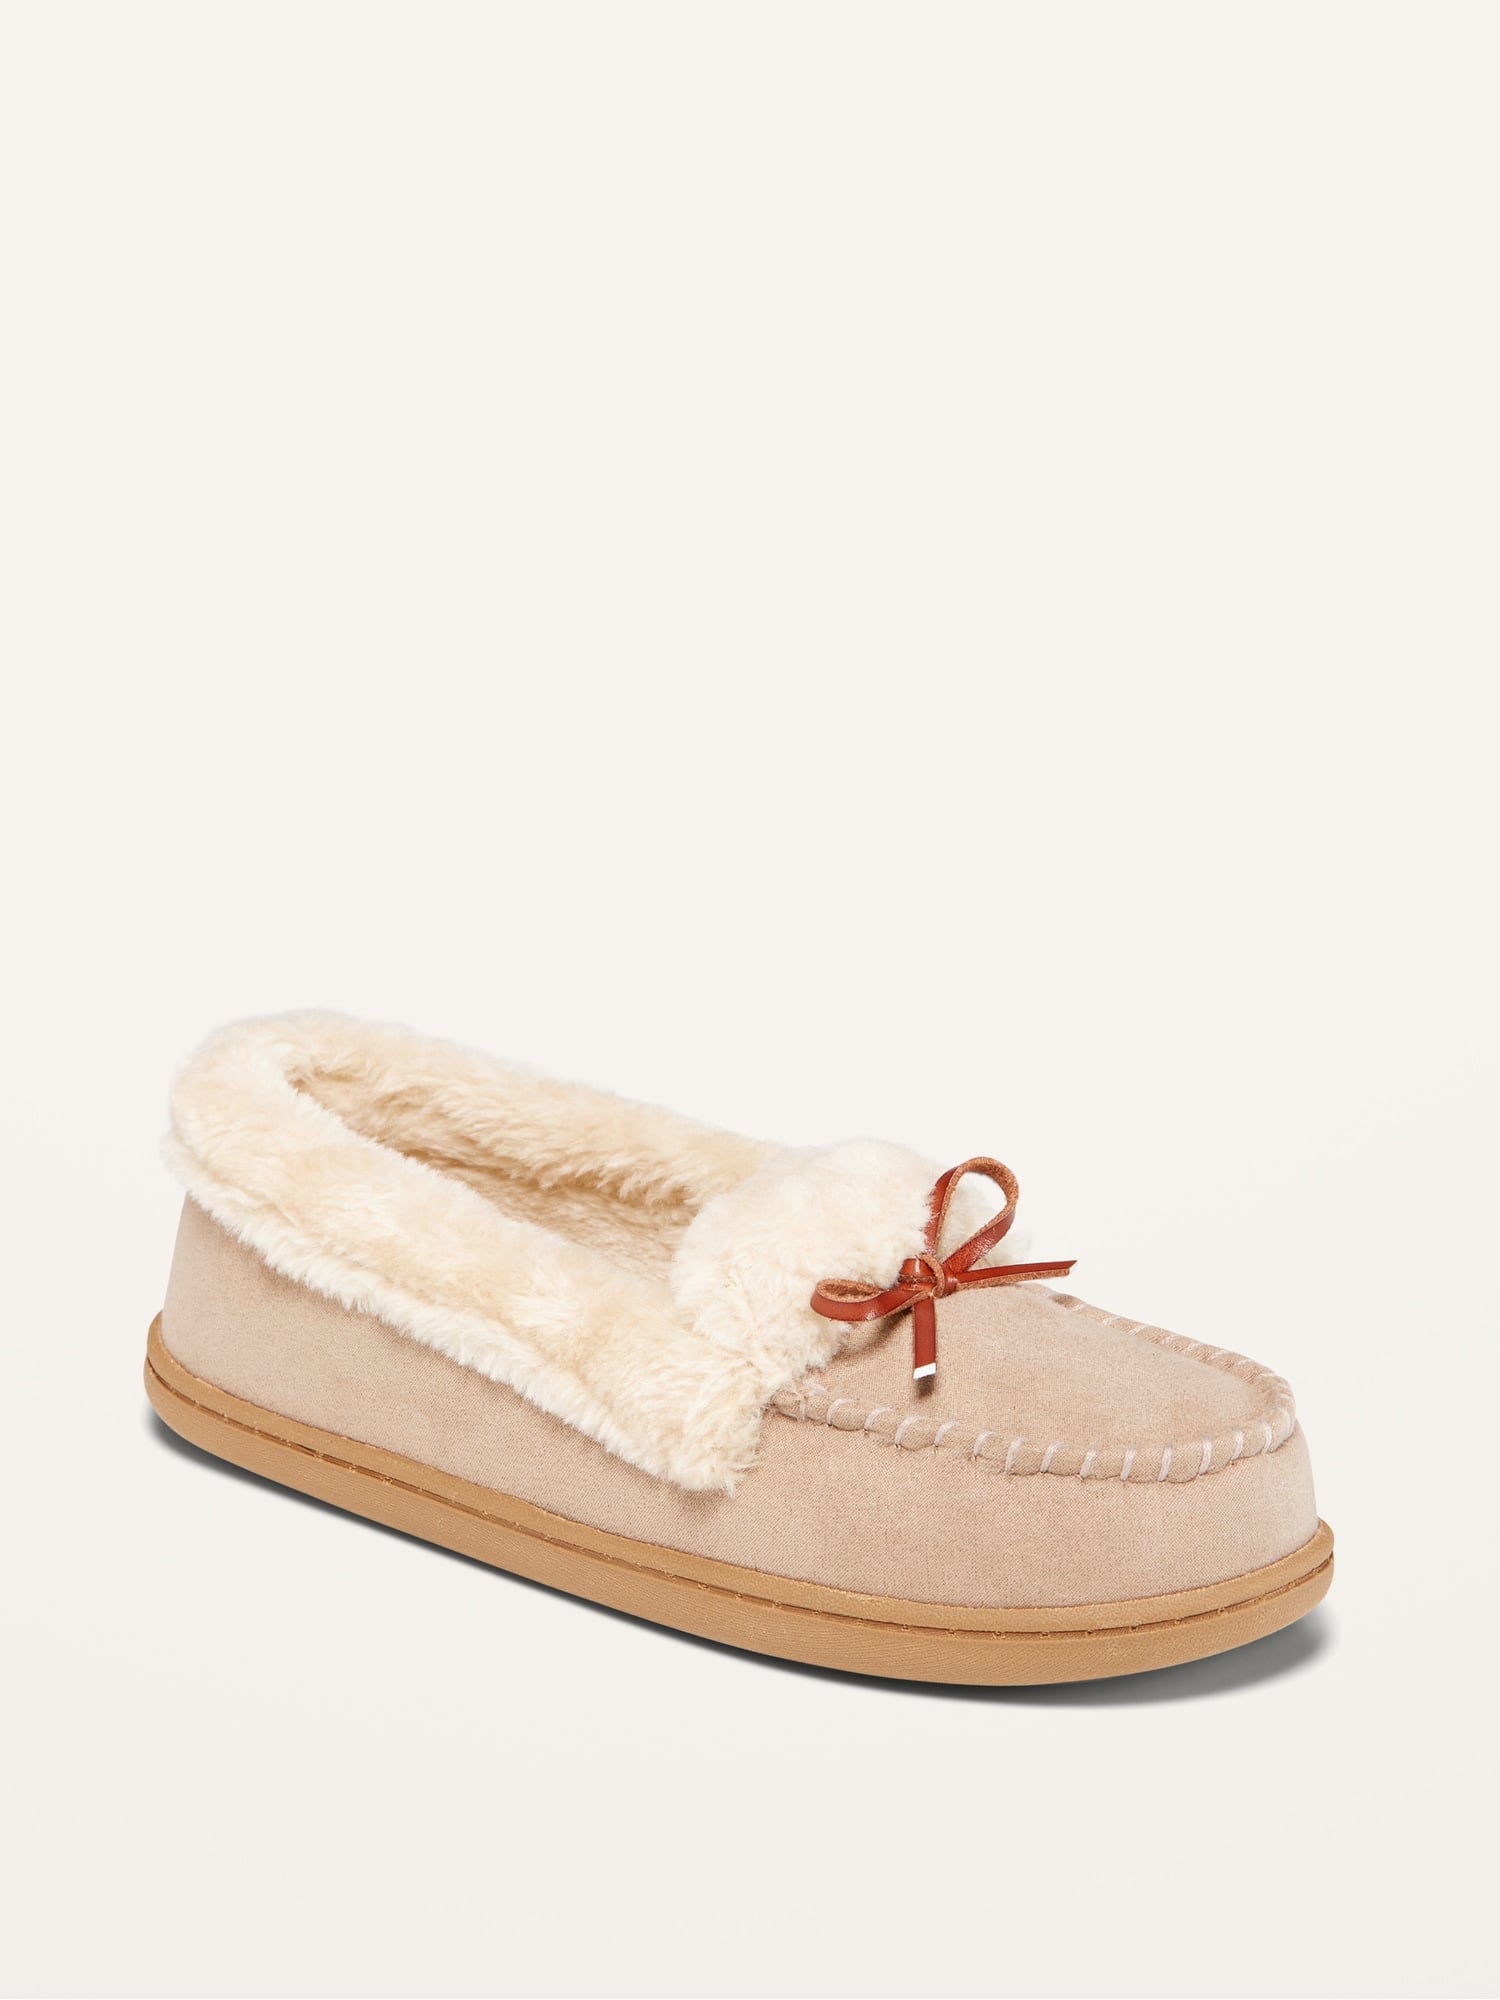 old navy boys slippers